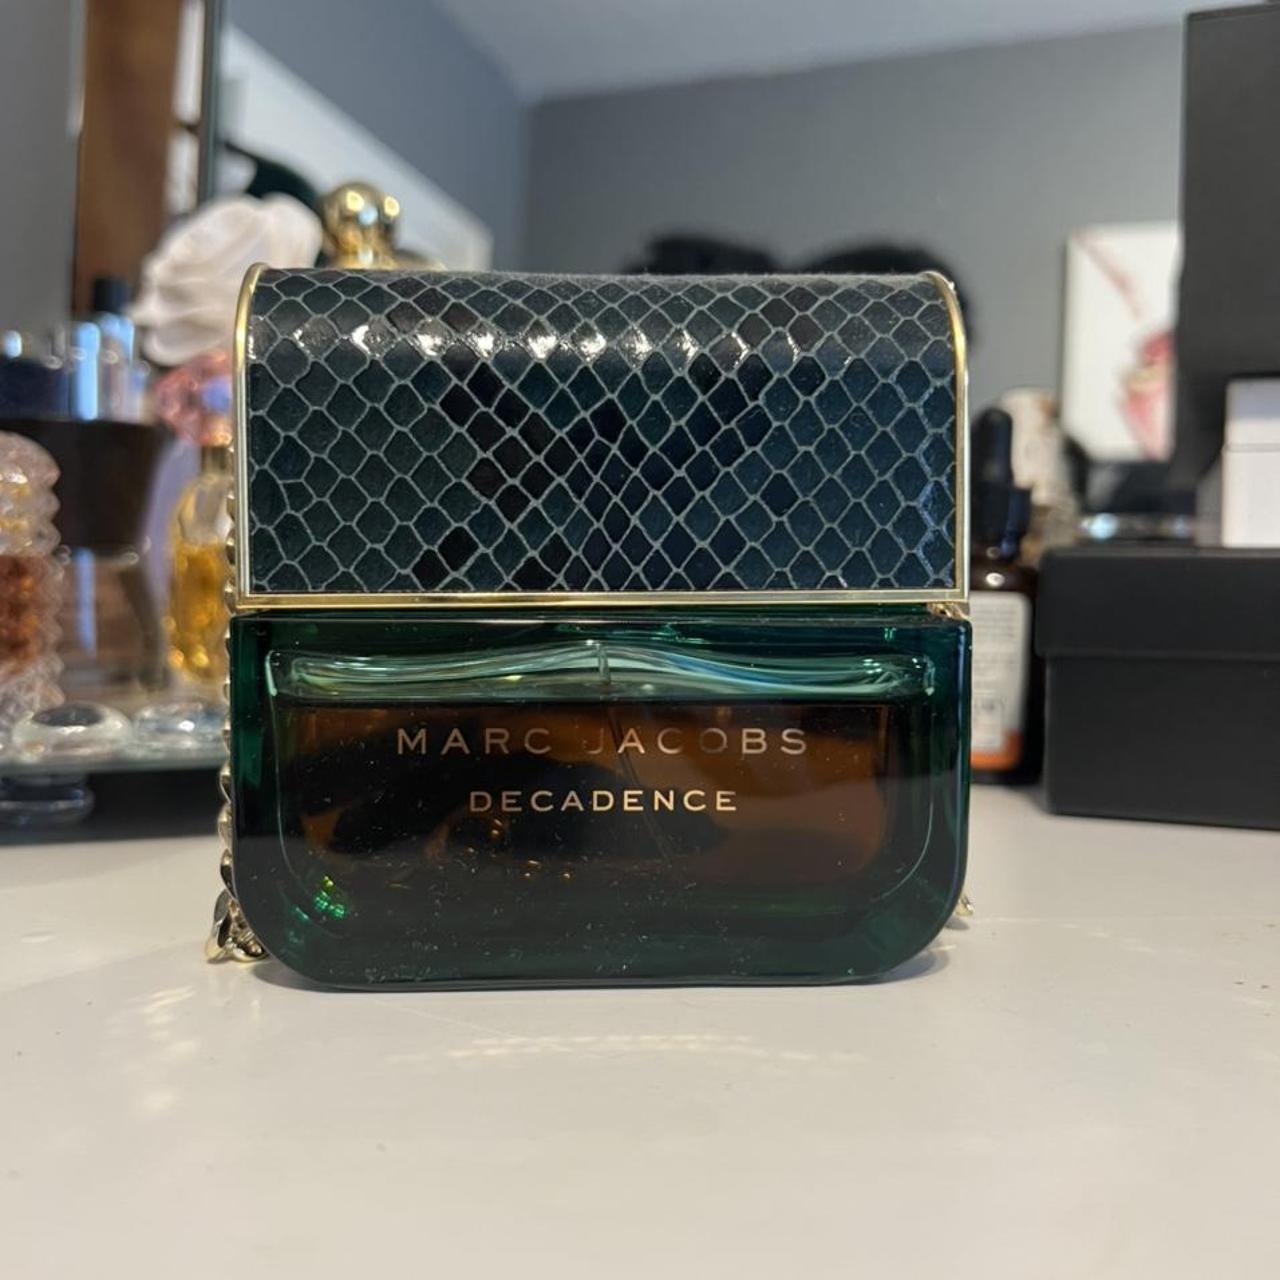 Marc Jacobs Decadence 3.3 oz * it’s discontinued... - Depop